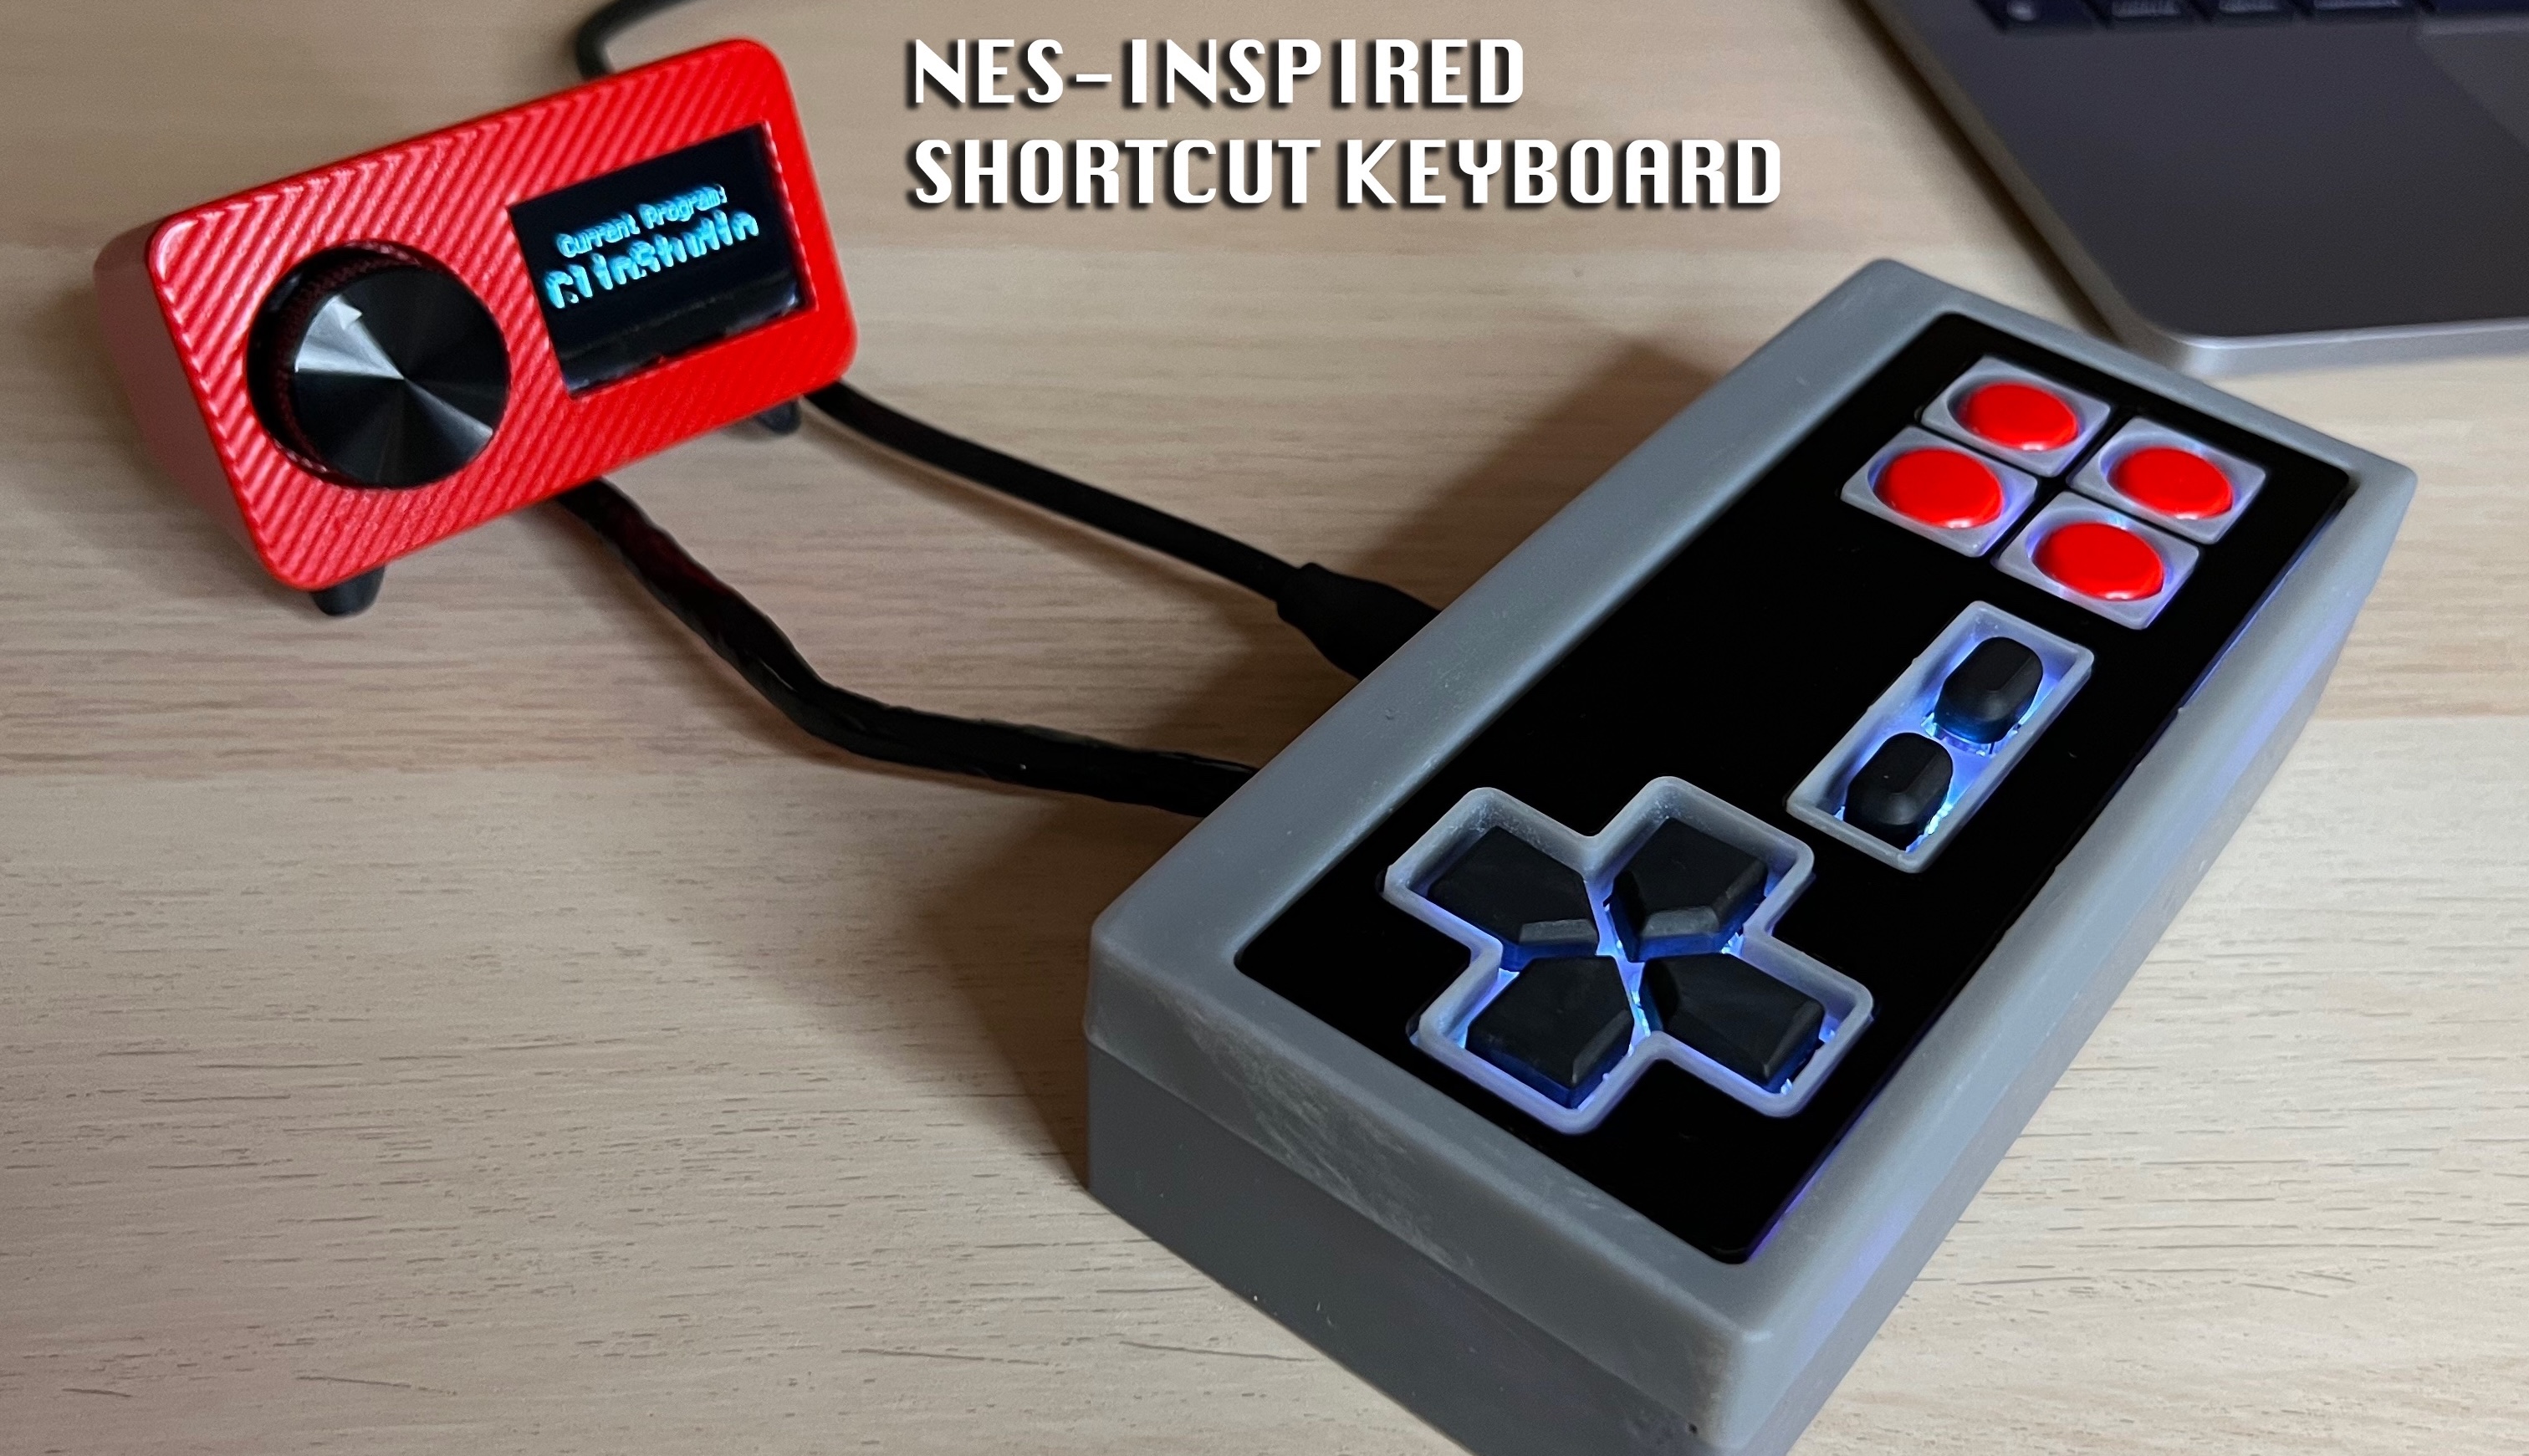 A shortcut or macro keyboard in the shape of an NES controller.